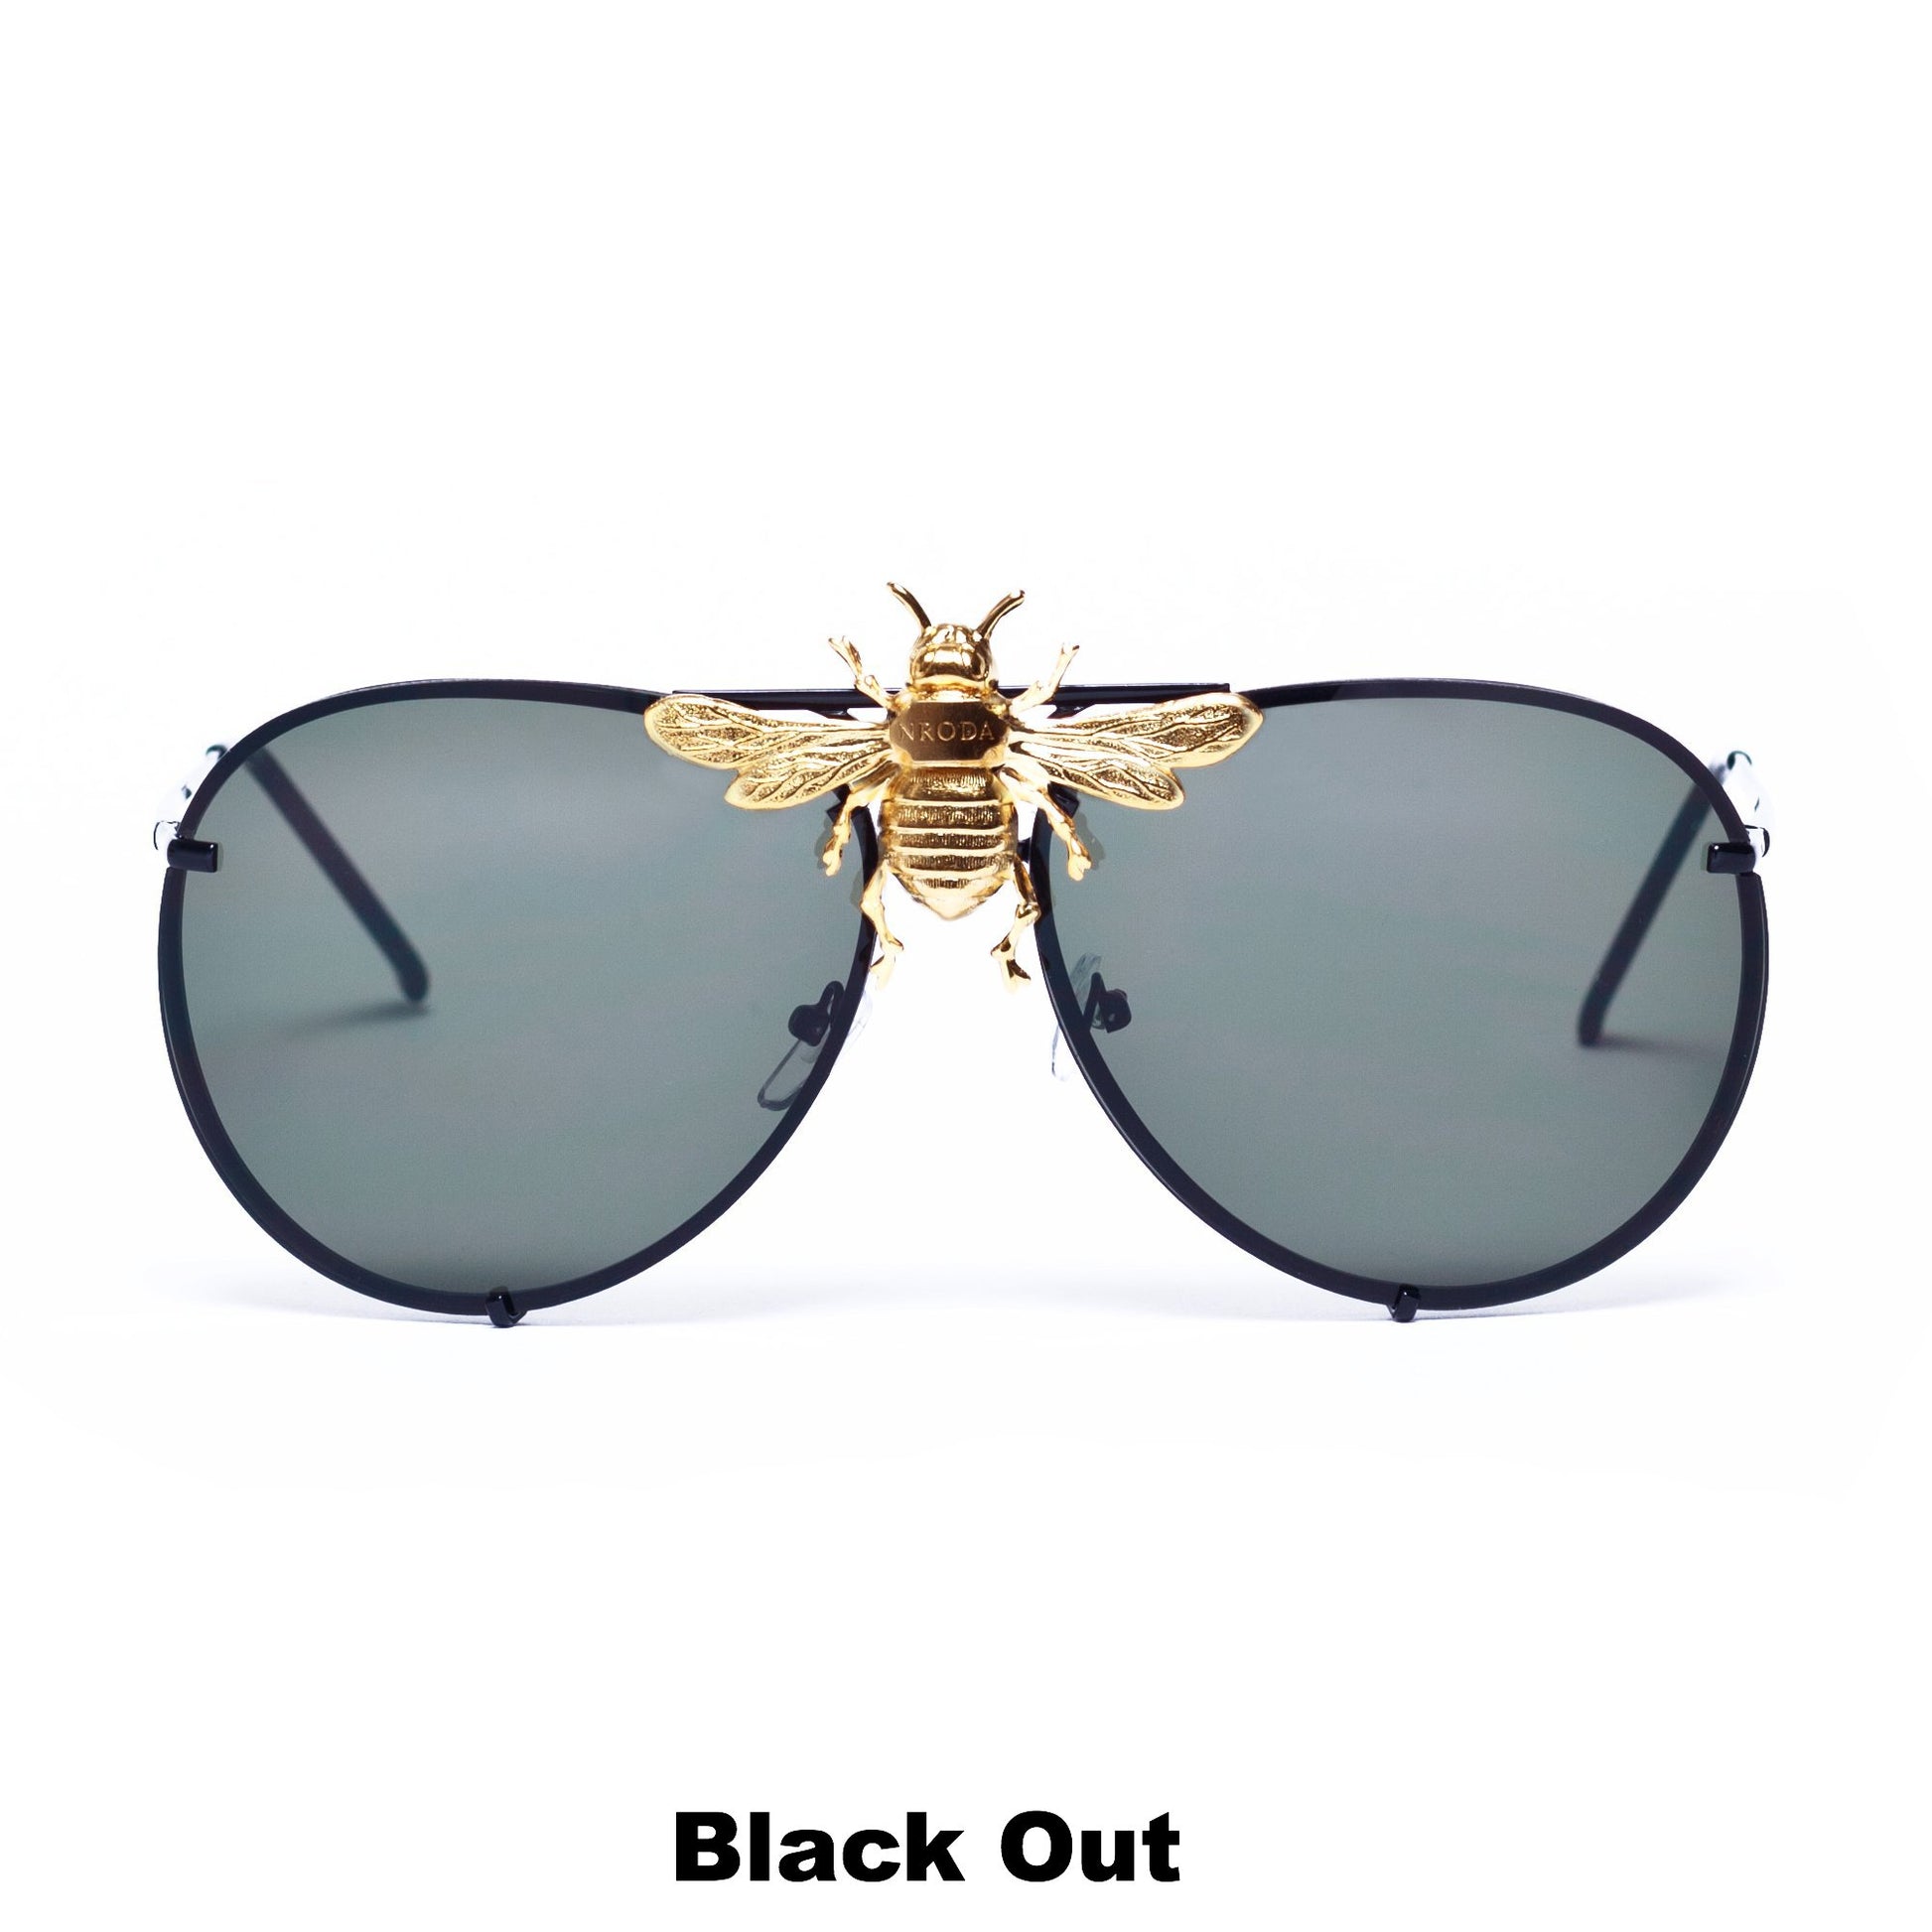 PREORDER: I’ll Be Rich Forever Bee Sunglasses: Black Out Edition Black Out: Jet Lens/Jet frame SUNNIES + OPTICS Sunglasses Collection, Tnemnroda man- NRODA